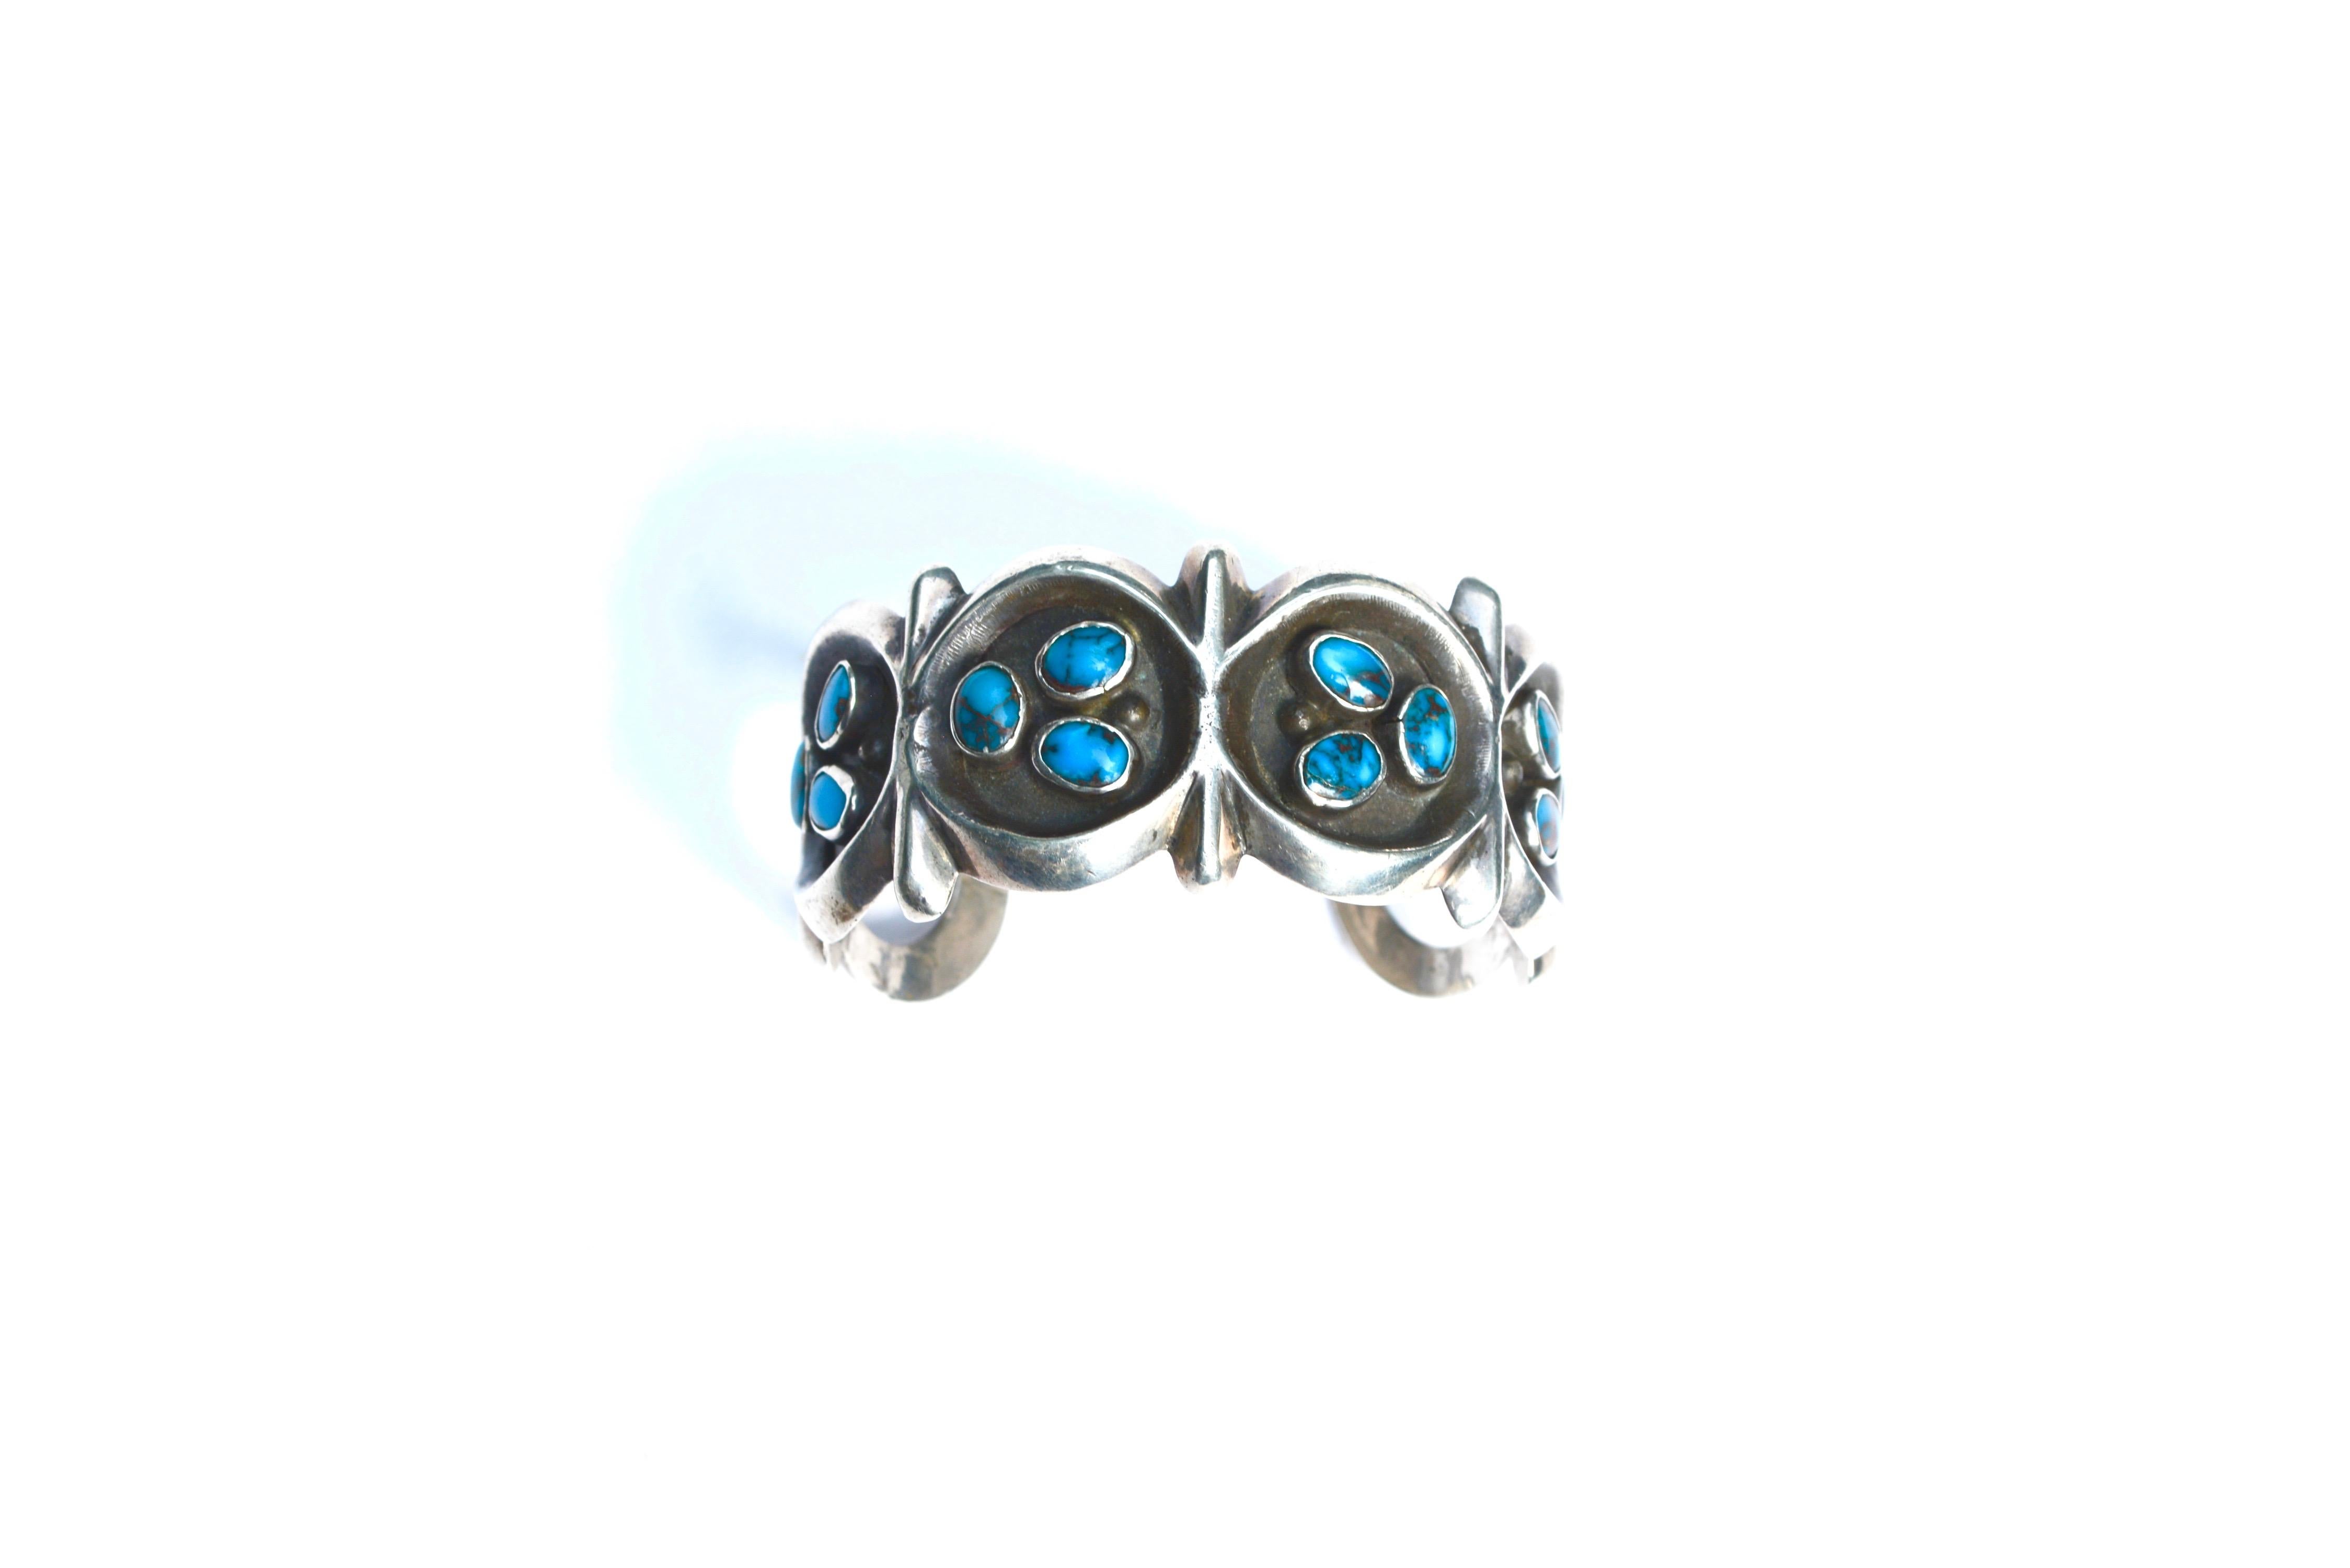 Circa 1940s-50s unsigned Navajo sand cast cuff with turquoise details. Unmarked. Handmade. 5.5